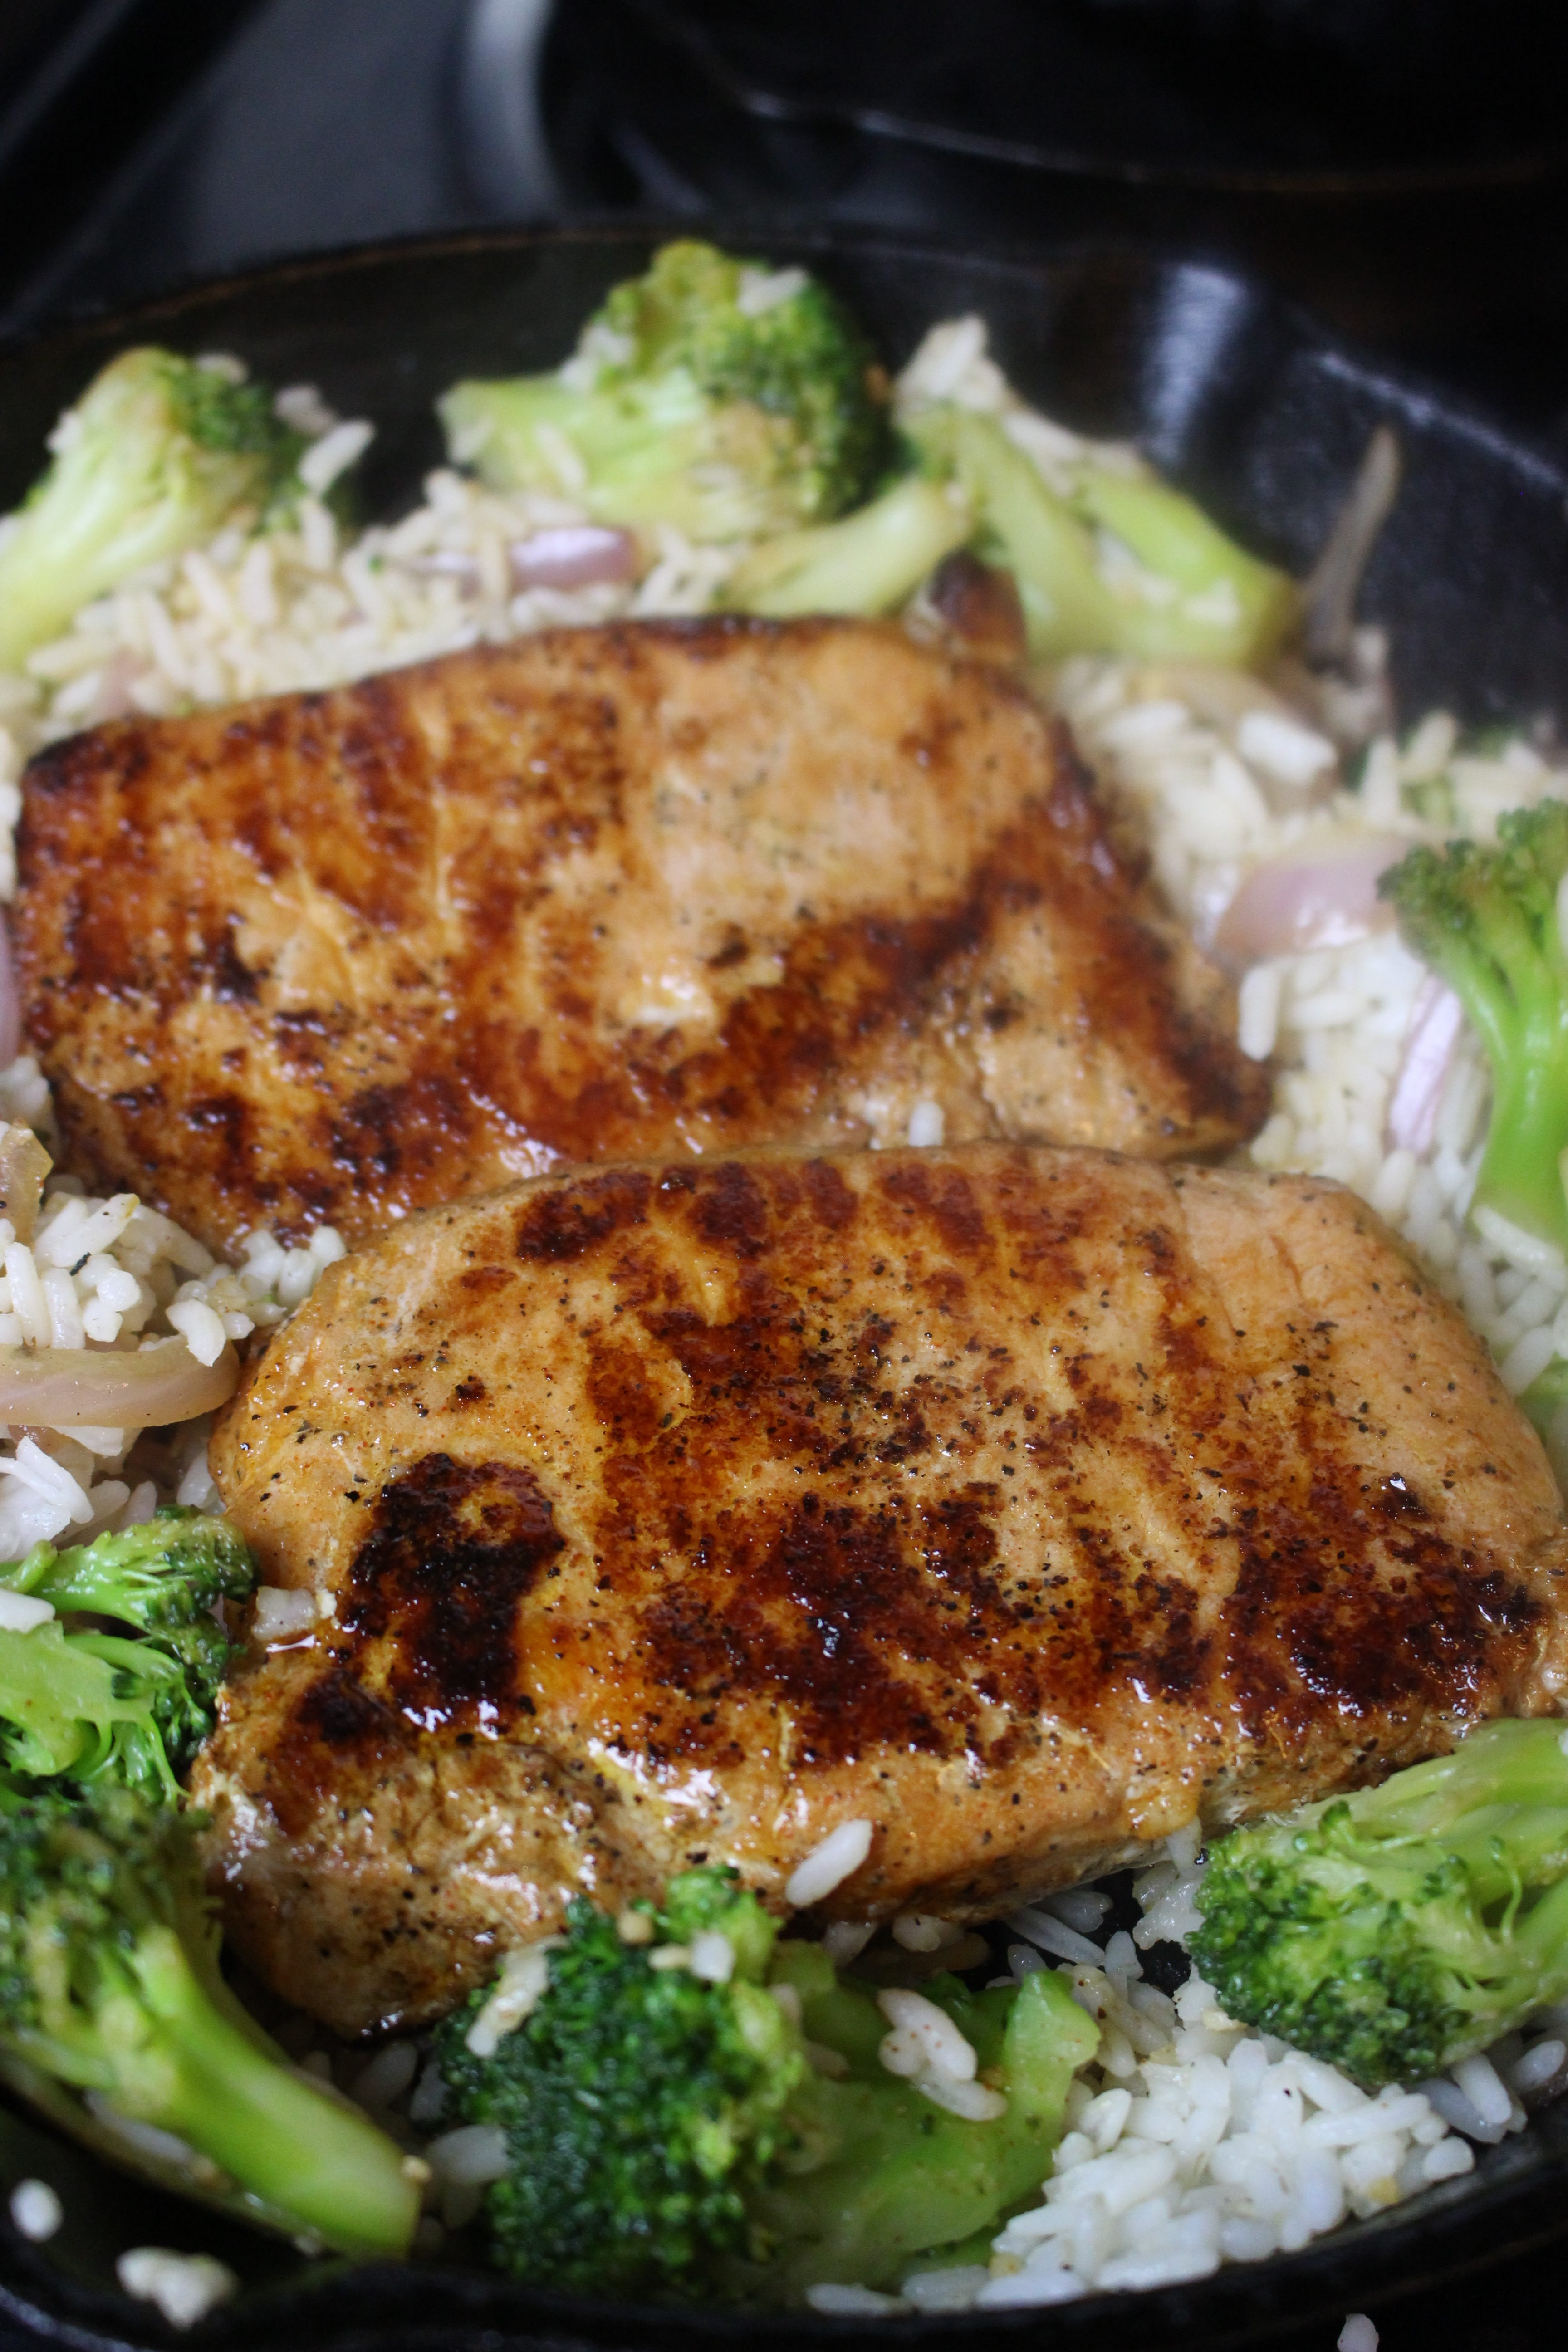 These lightly breaded pork chops have a nice seasoned crust